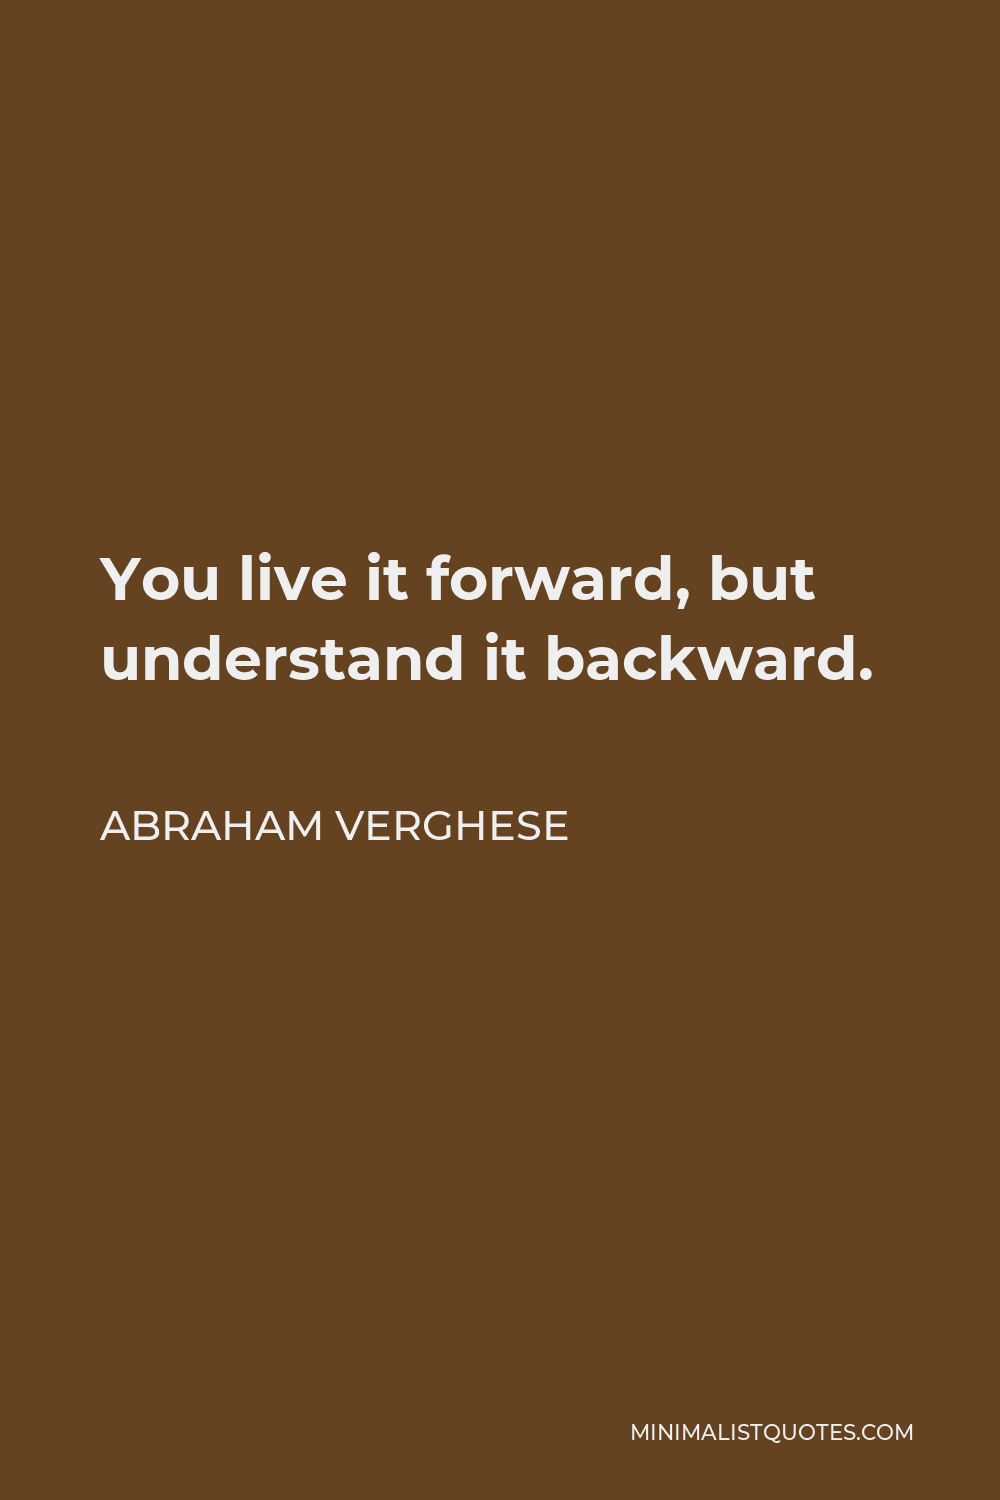 Abraham Verghese Quote - You live it forward, but understand it backward.